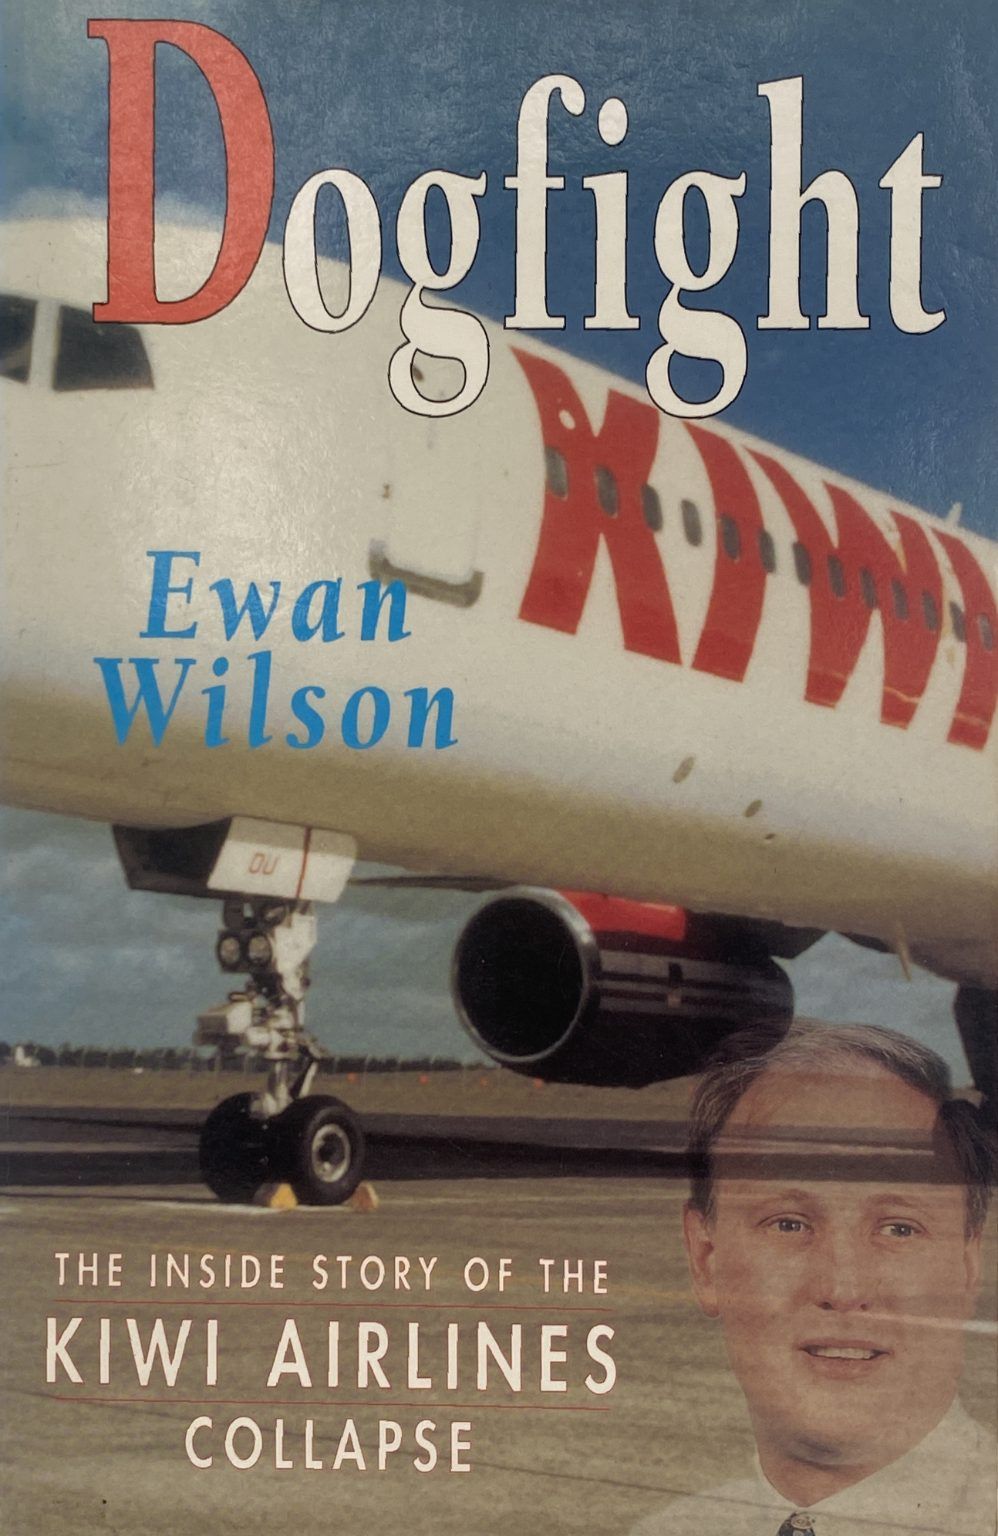 DOGFIGHT: The inside story of the Kiwi Airlines Collapse